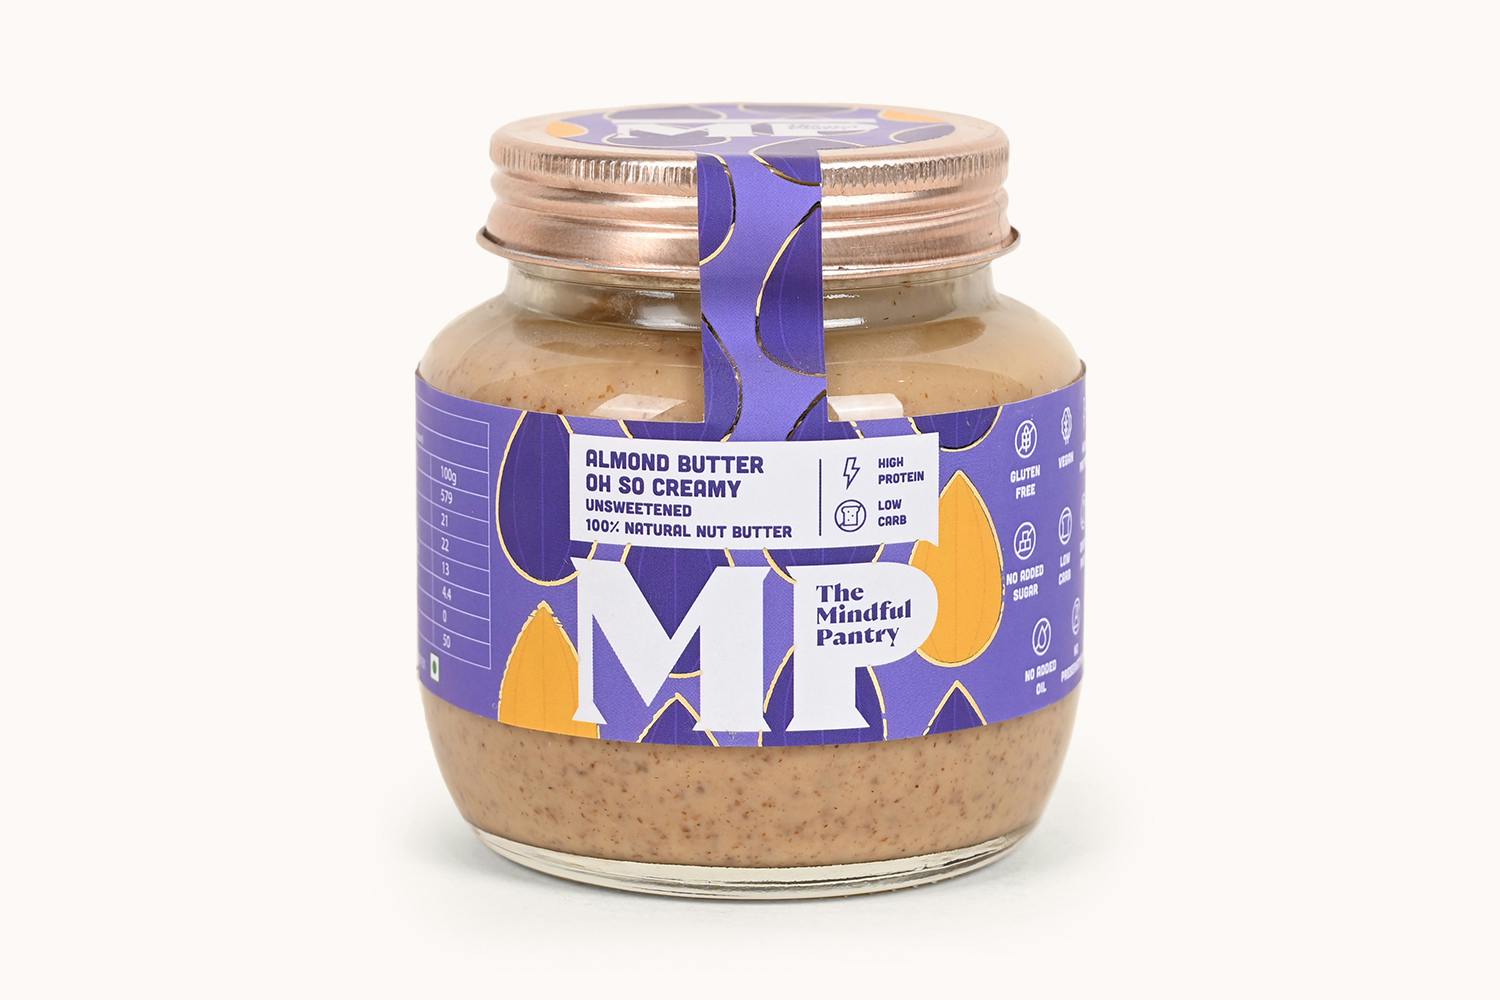 The Mindful Pantry Almond Butter - Creamy